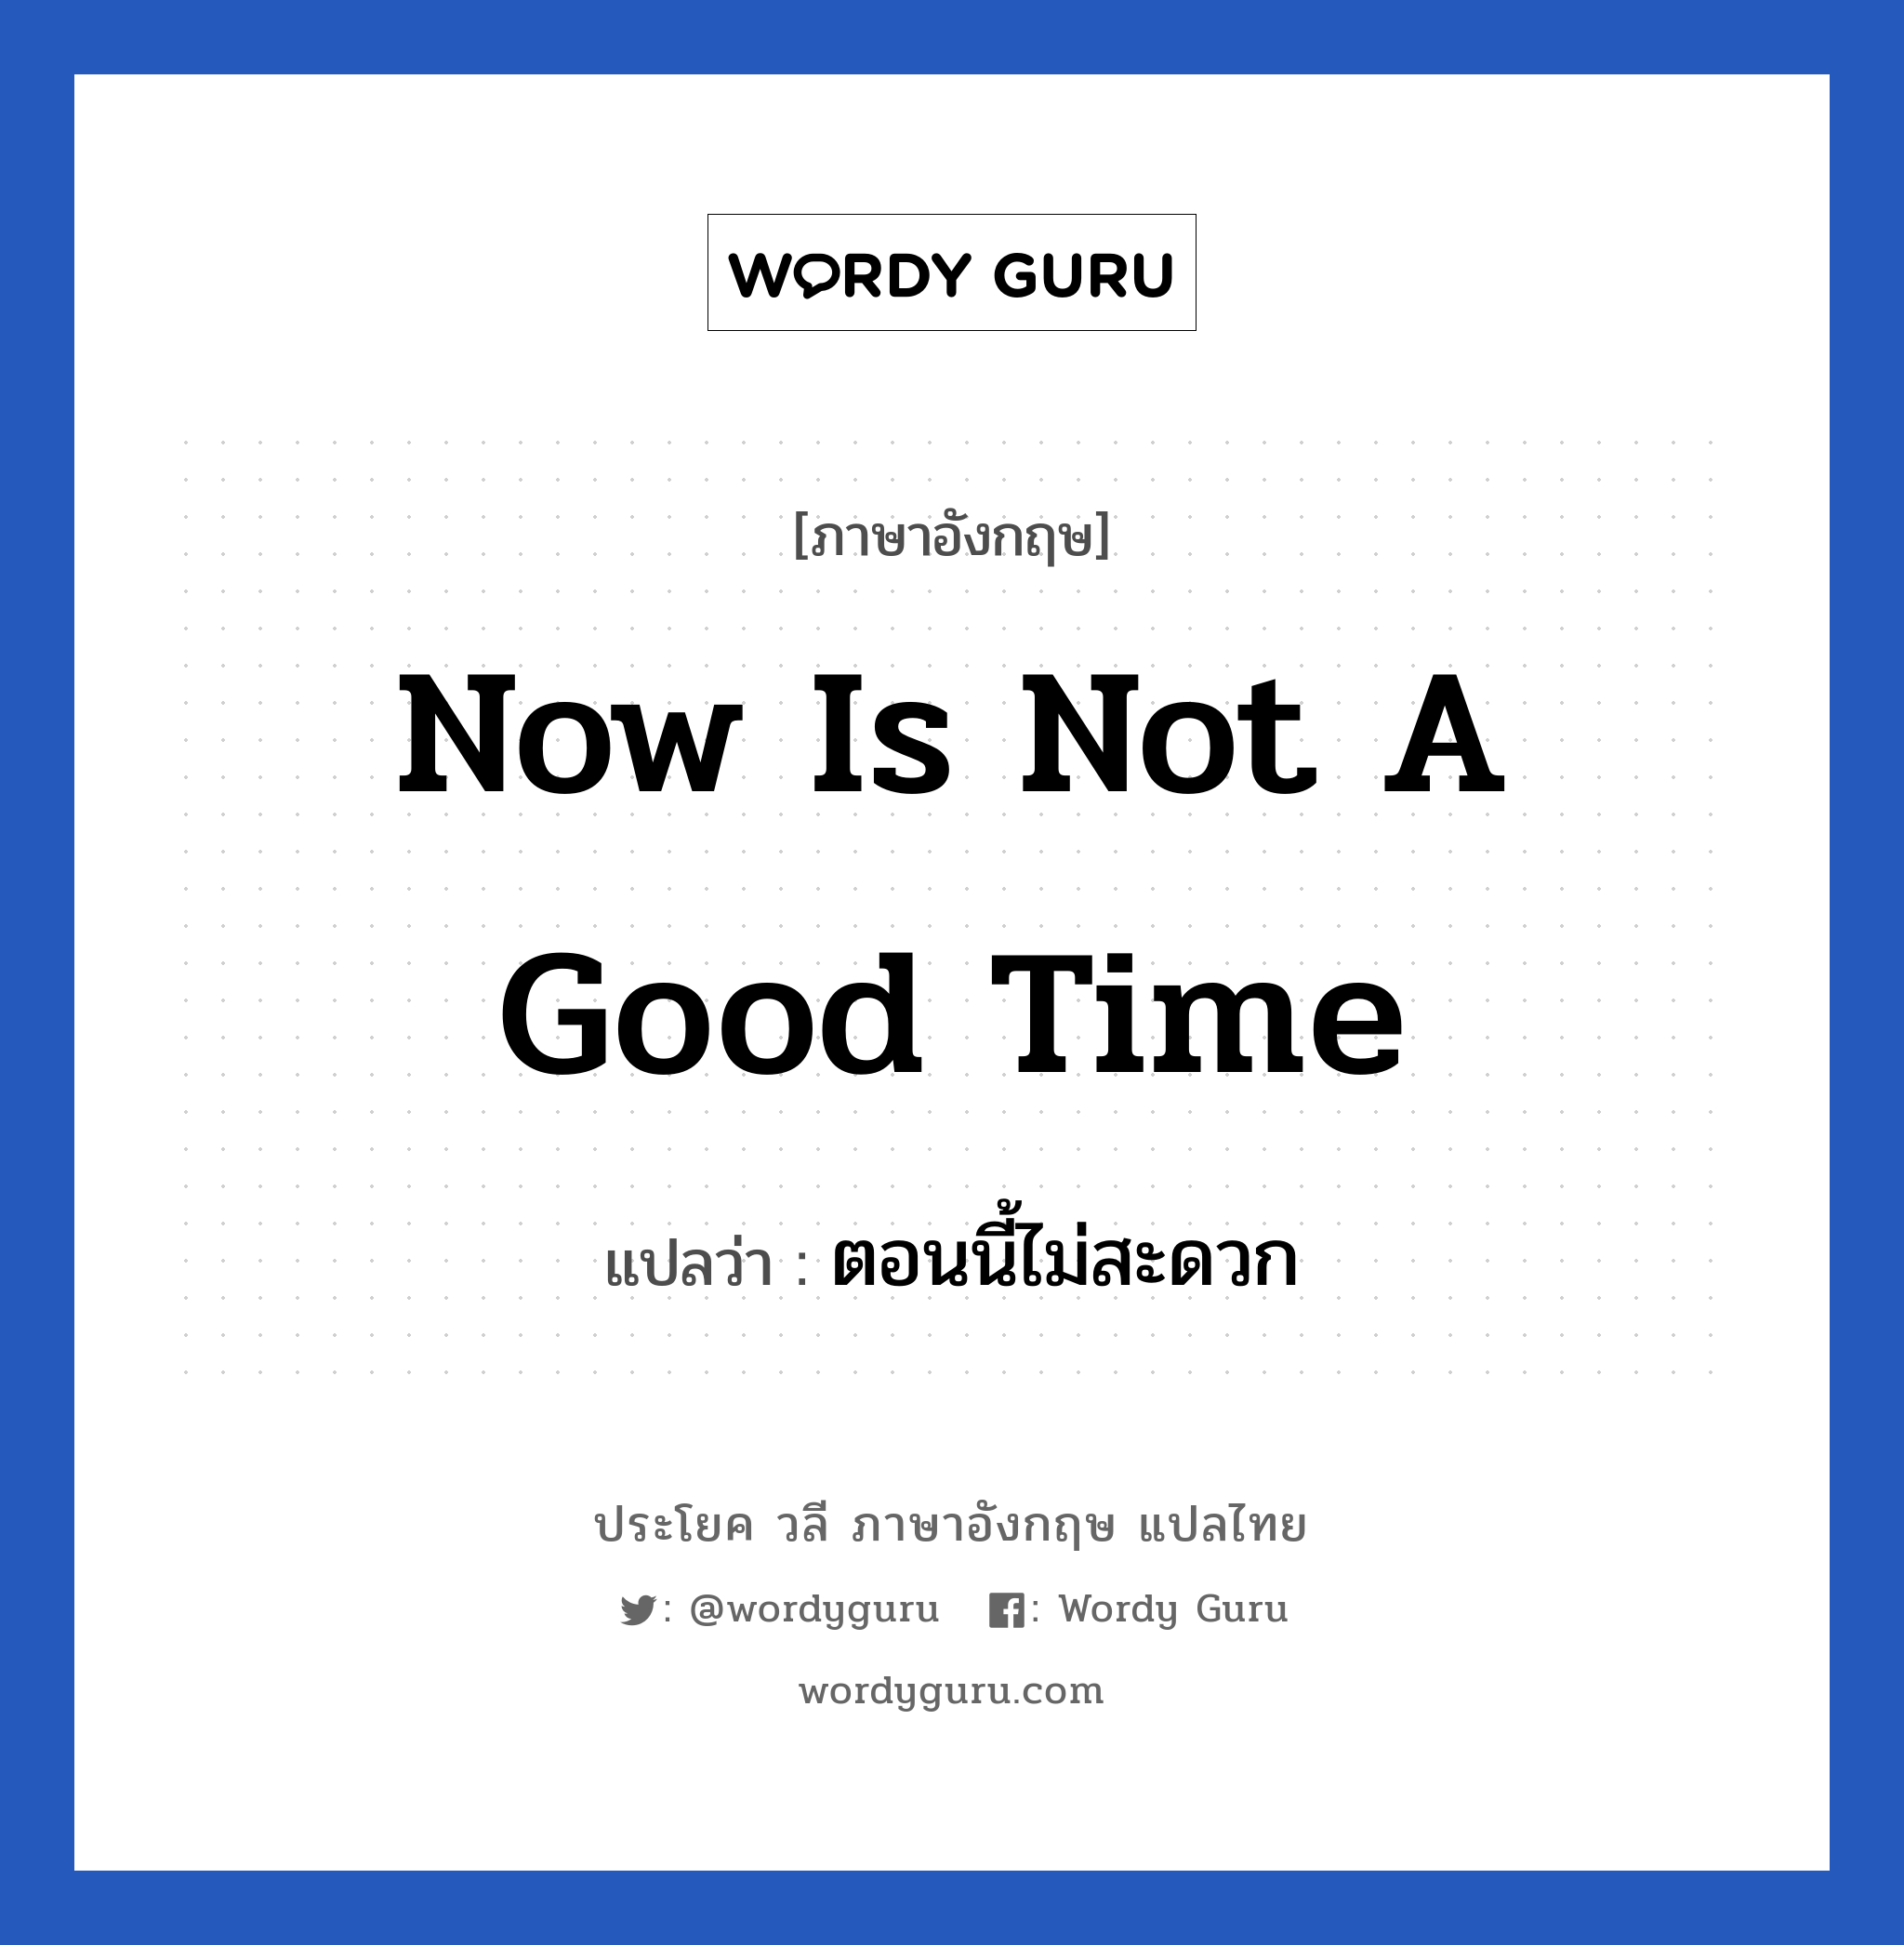 Now is not a good time แปลว่า?, วลีภาษาอังกฤษ Now is not a good time แปลว่า ตอนนี้ไม่สะดวก